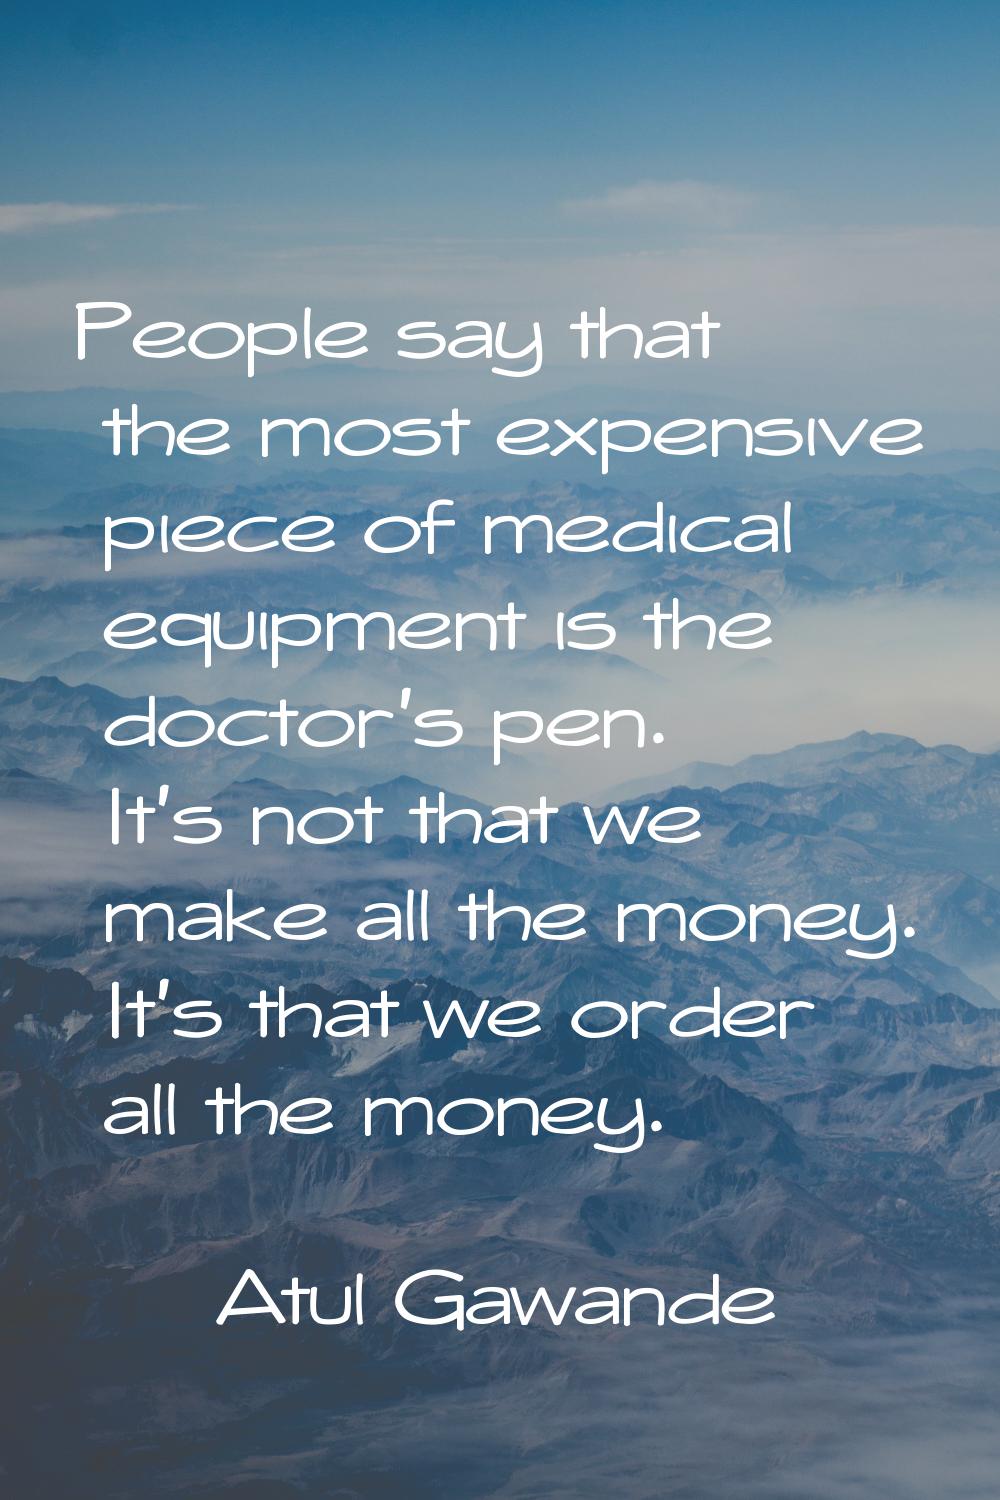 People say that the most expensive piece of medical equipment is the doctor's pen. It's not that we